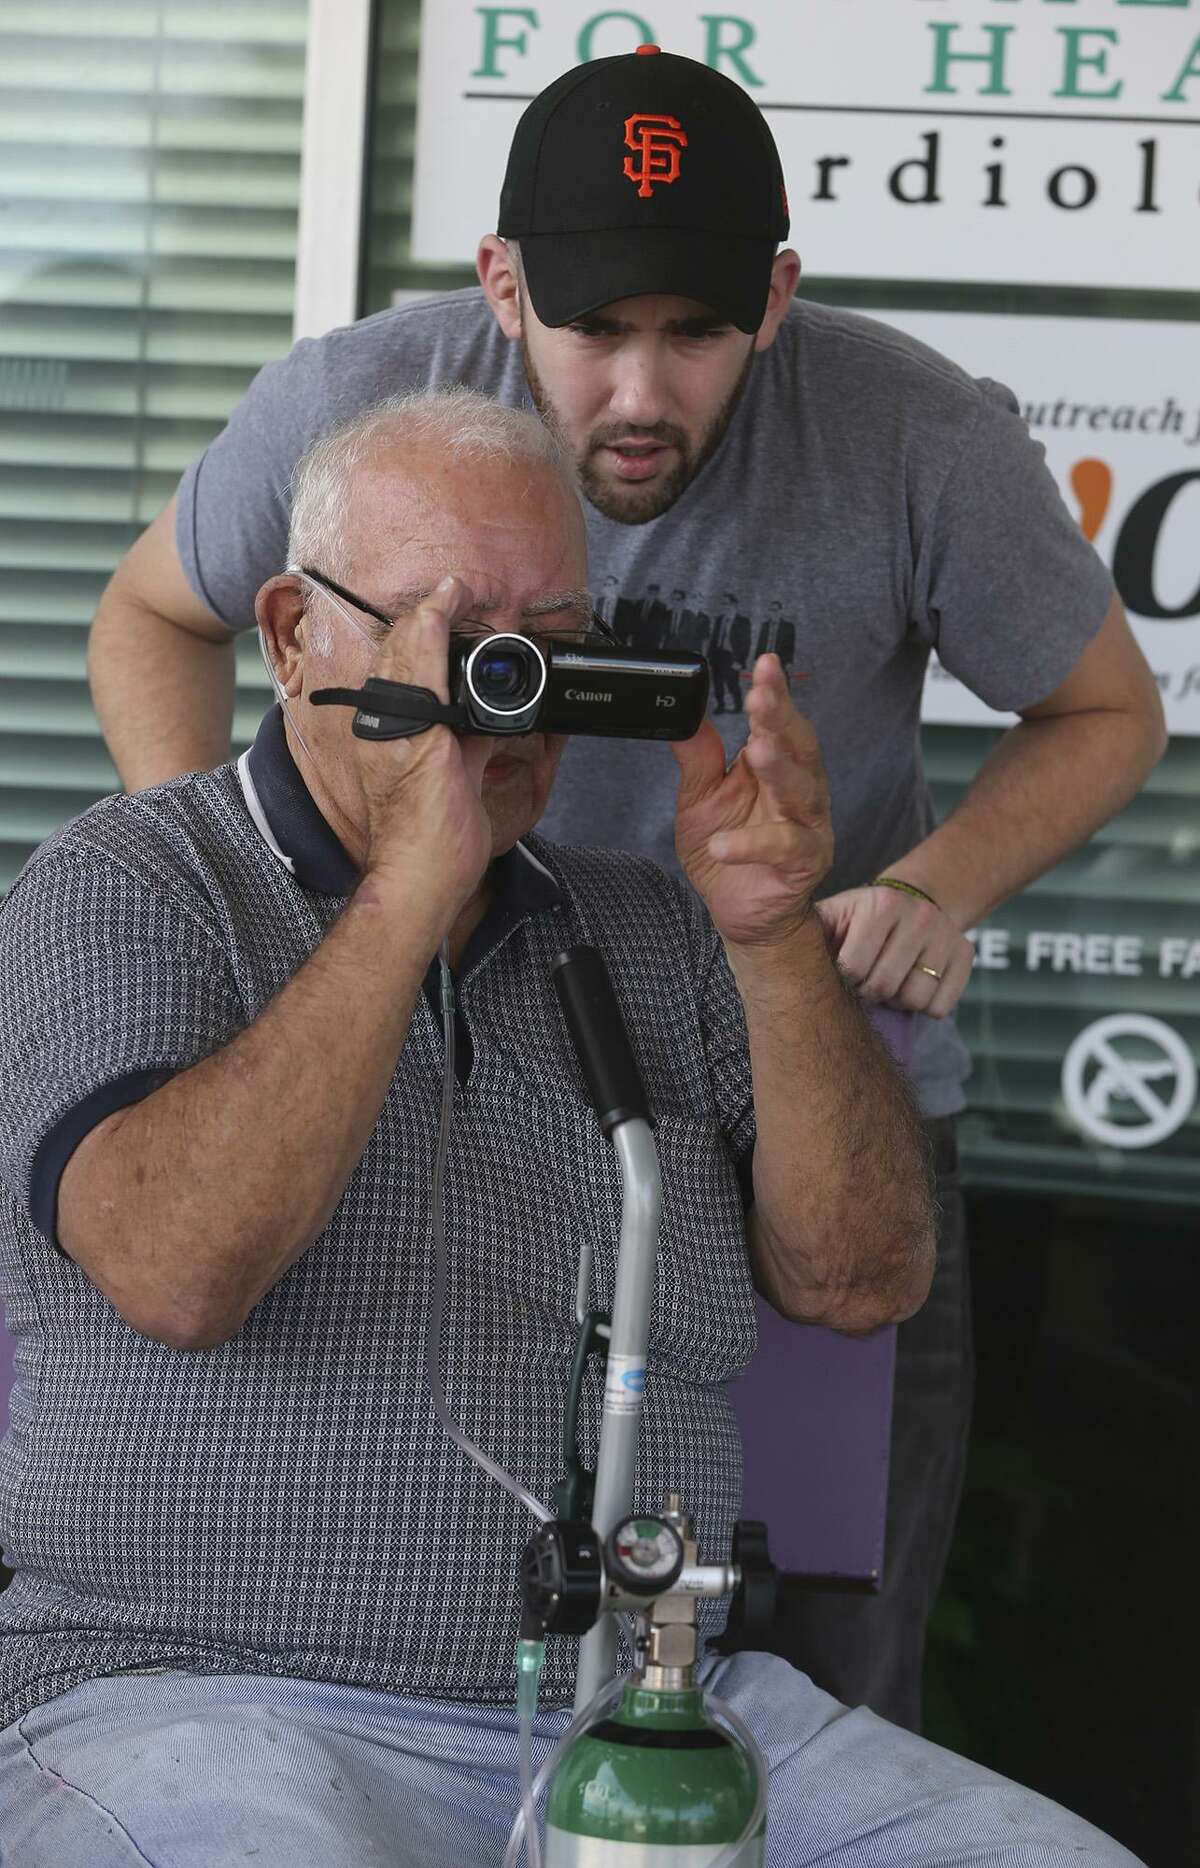 U.S. Air Force veteran John Geraci (seated) video tapes Wednesday February 8, 2017 with the help of instructor Dani Tenenbaum (wearing cap) during the Patton Veterans Project's I Was There Film Workshop currently being held at Cisneros Senior Center on Southwest Military Drive. The project is designed to help military families cope with stress or burdens in their lives. During the multi-day I Was There film workshops, participants are introduced to theoretical and practical aspects of filmmaking, and collaborate with veterans to conceive, shoot and edit short films.